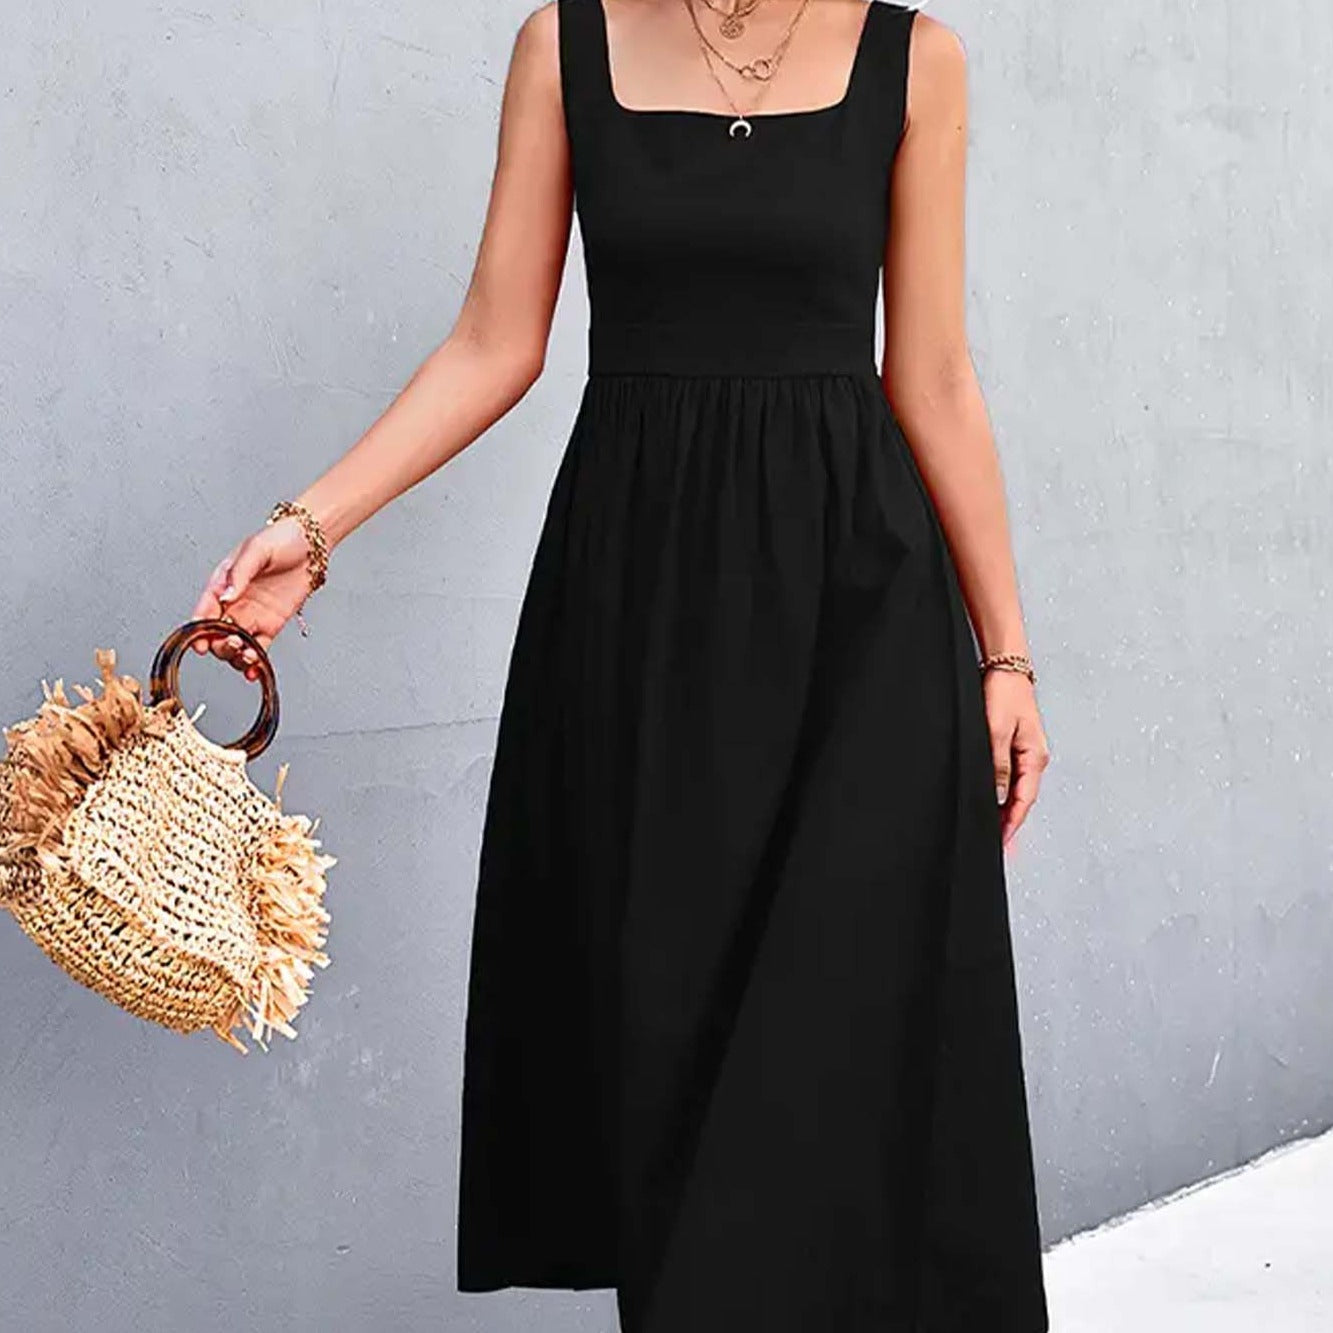 A woman wearing a Square Collar Sleeveless Solid A Line Midi Dress in Black color from Don't Be Chy Boutique.